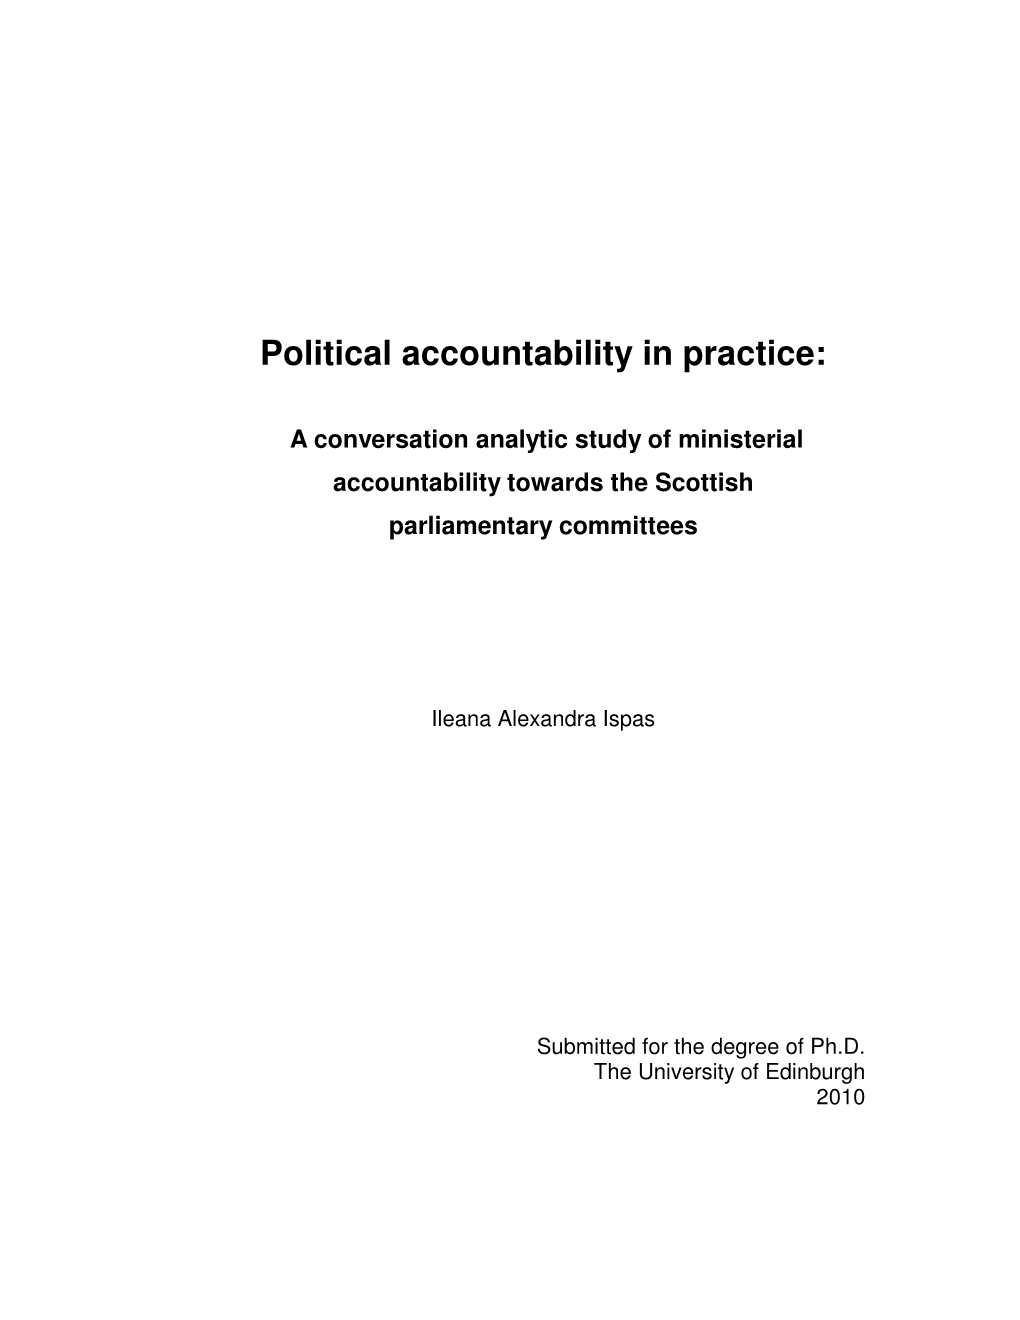 Political Accountability in Practice